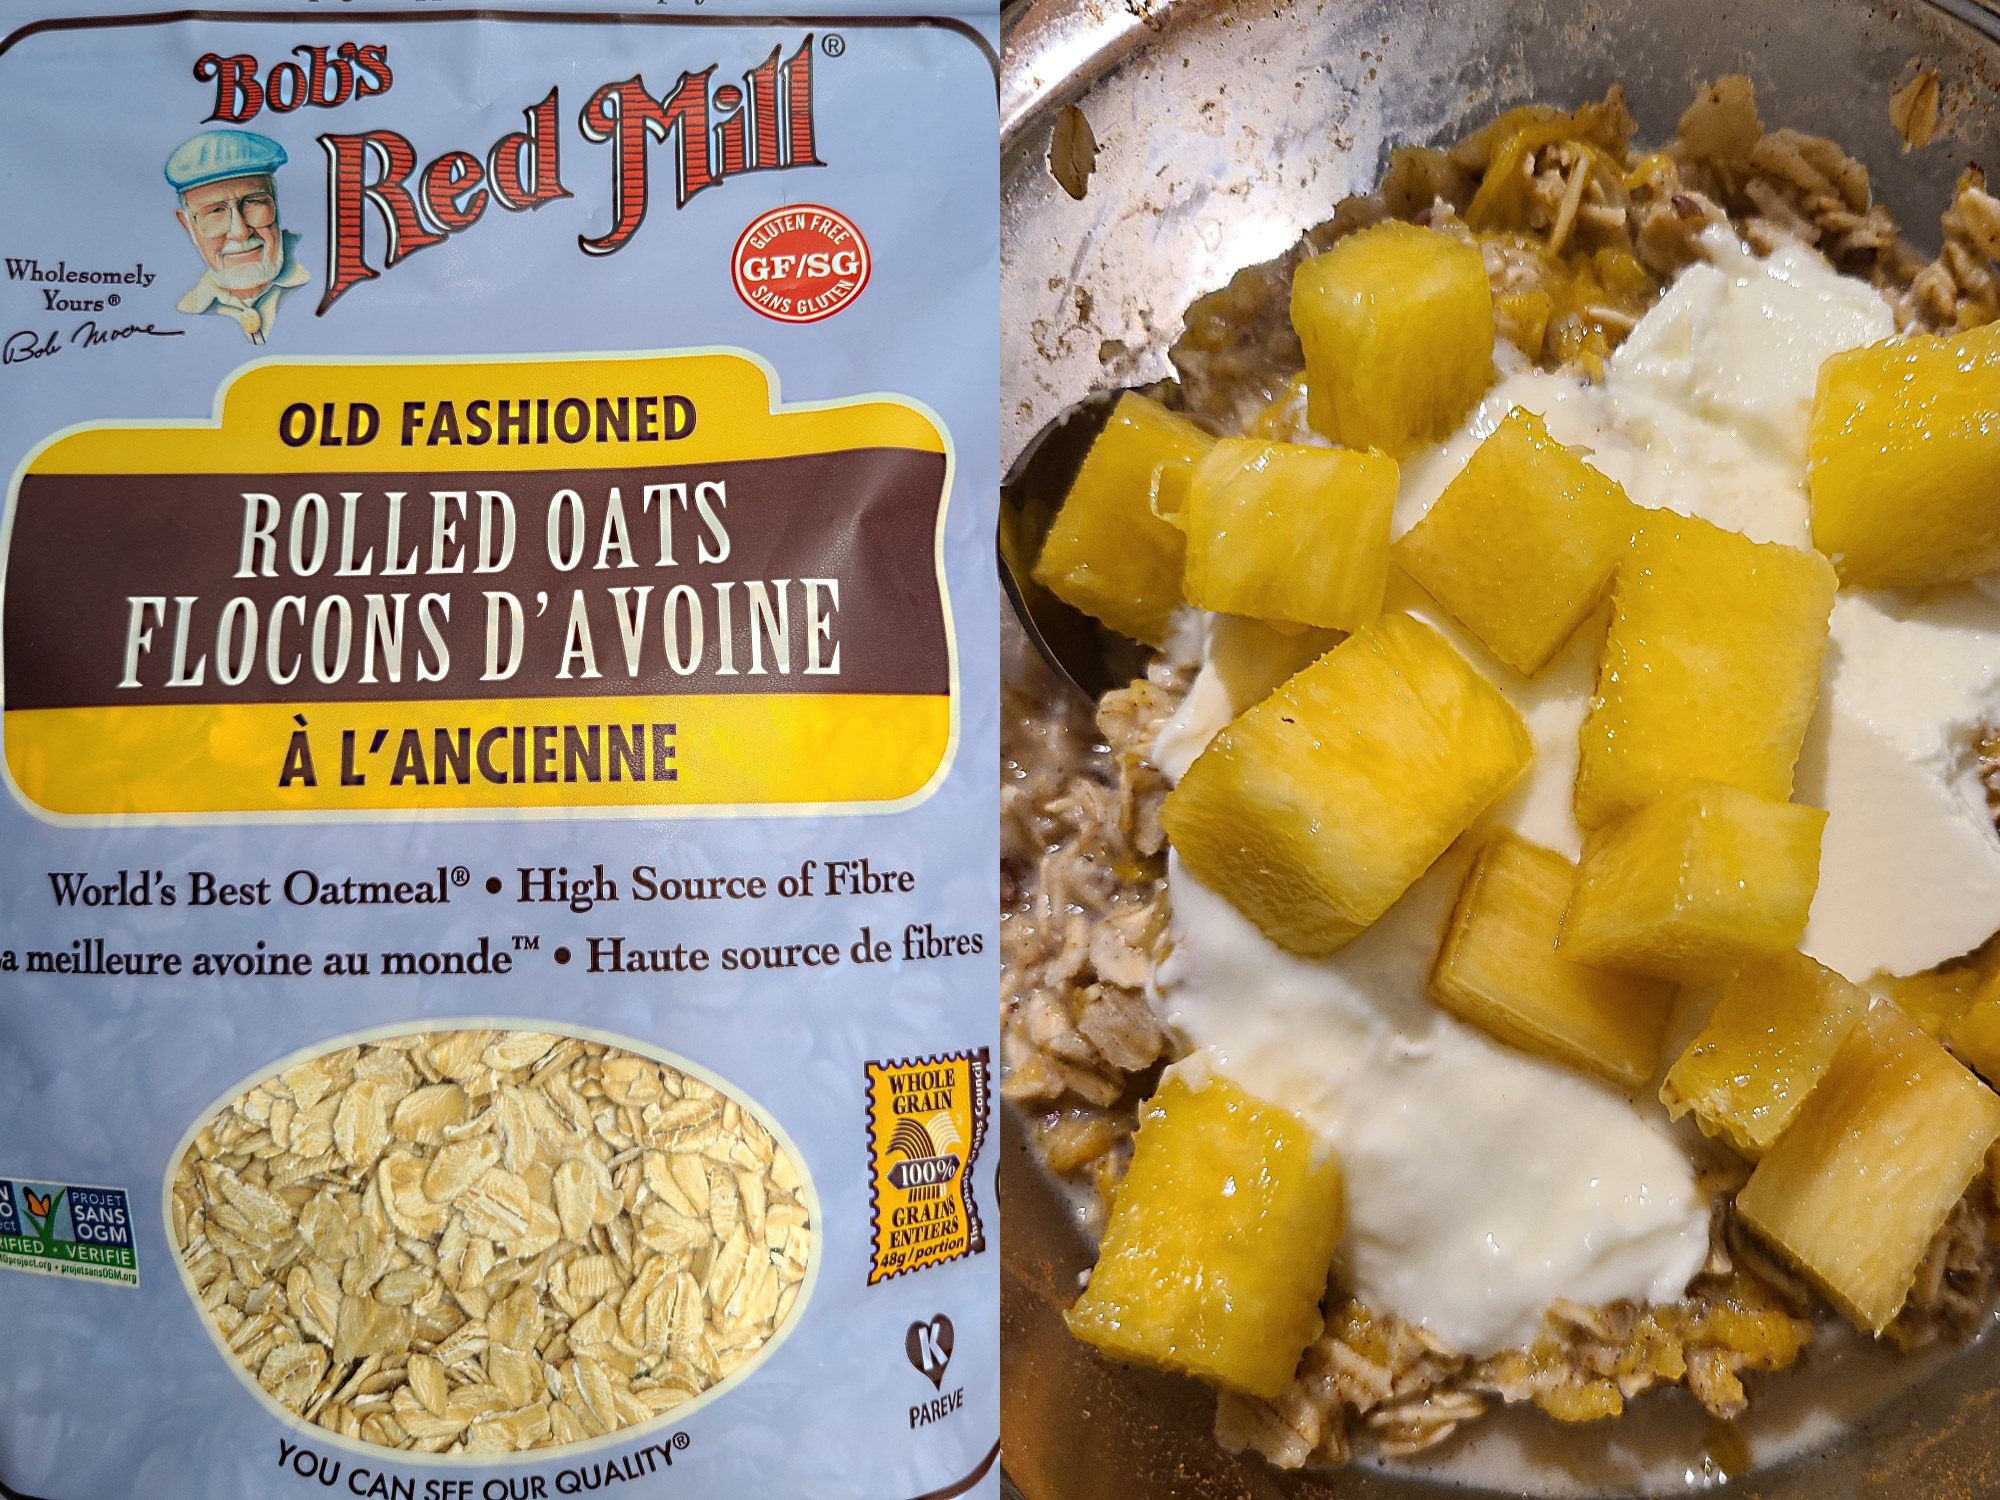 Bob's Red Mill rolled oats for breakfast - oatmeal breakfast with fruits and yogurt.